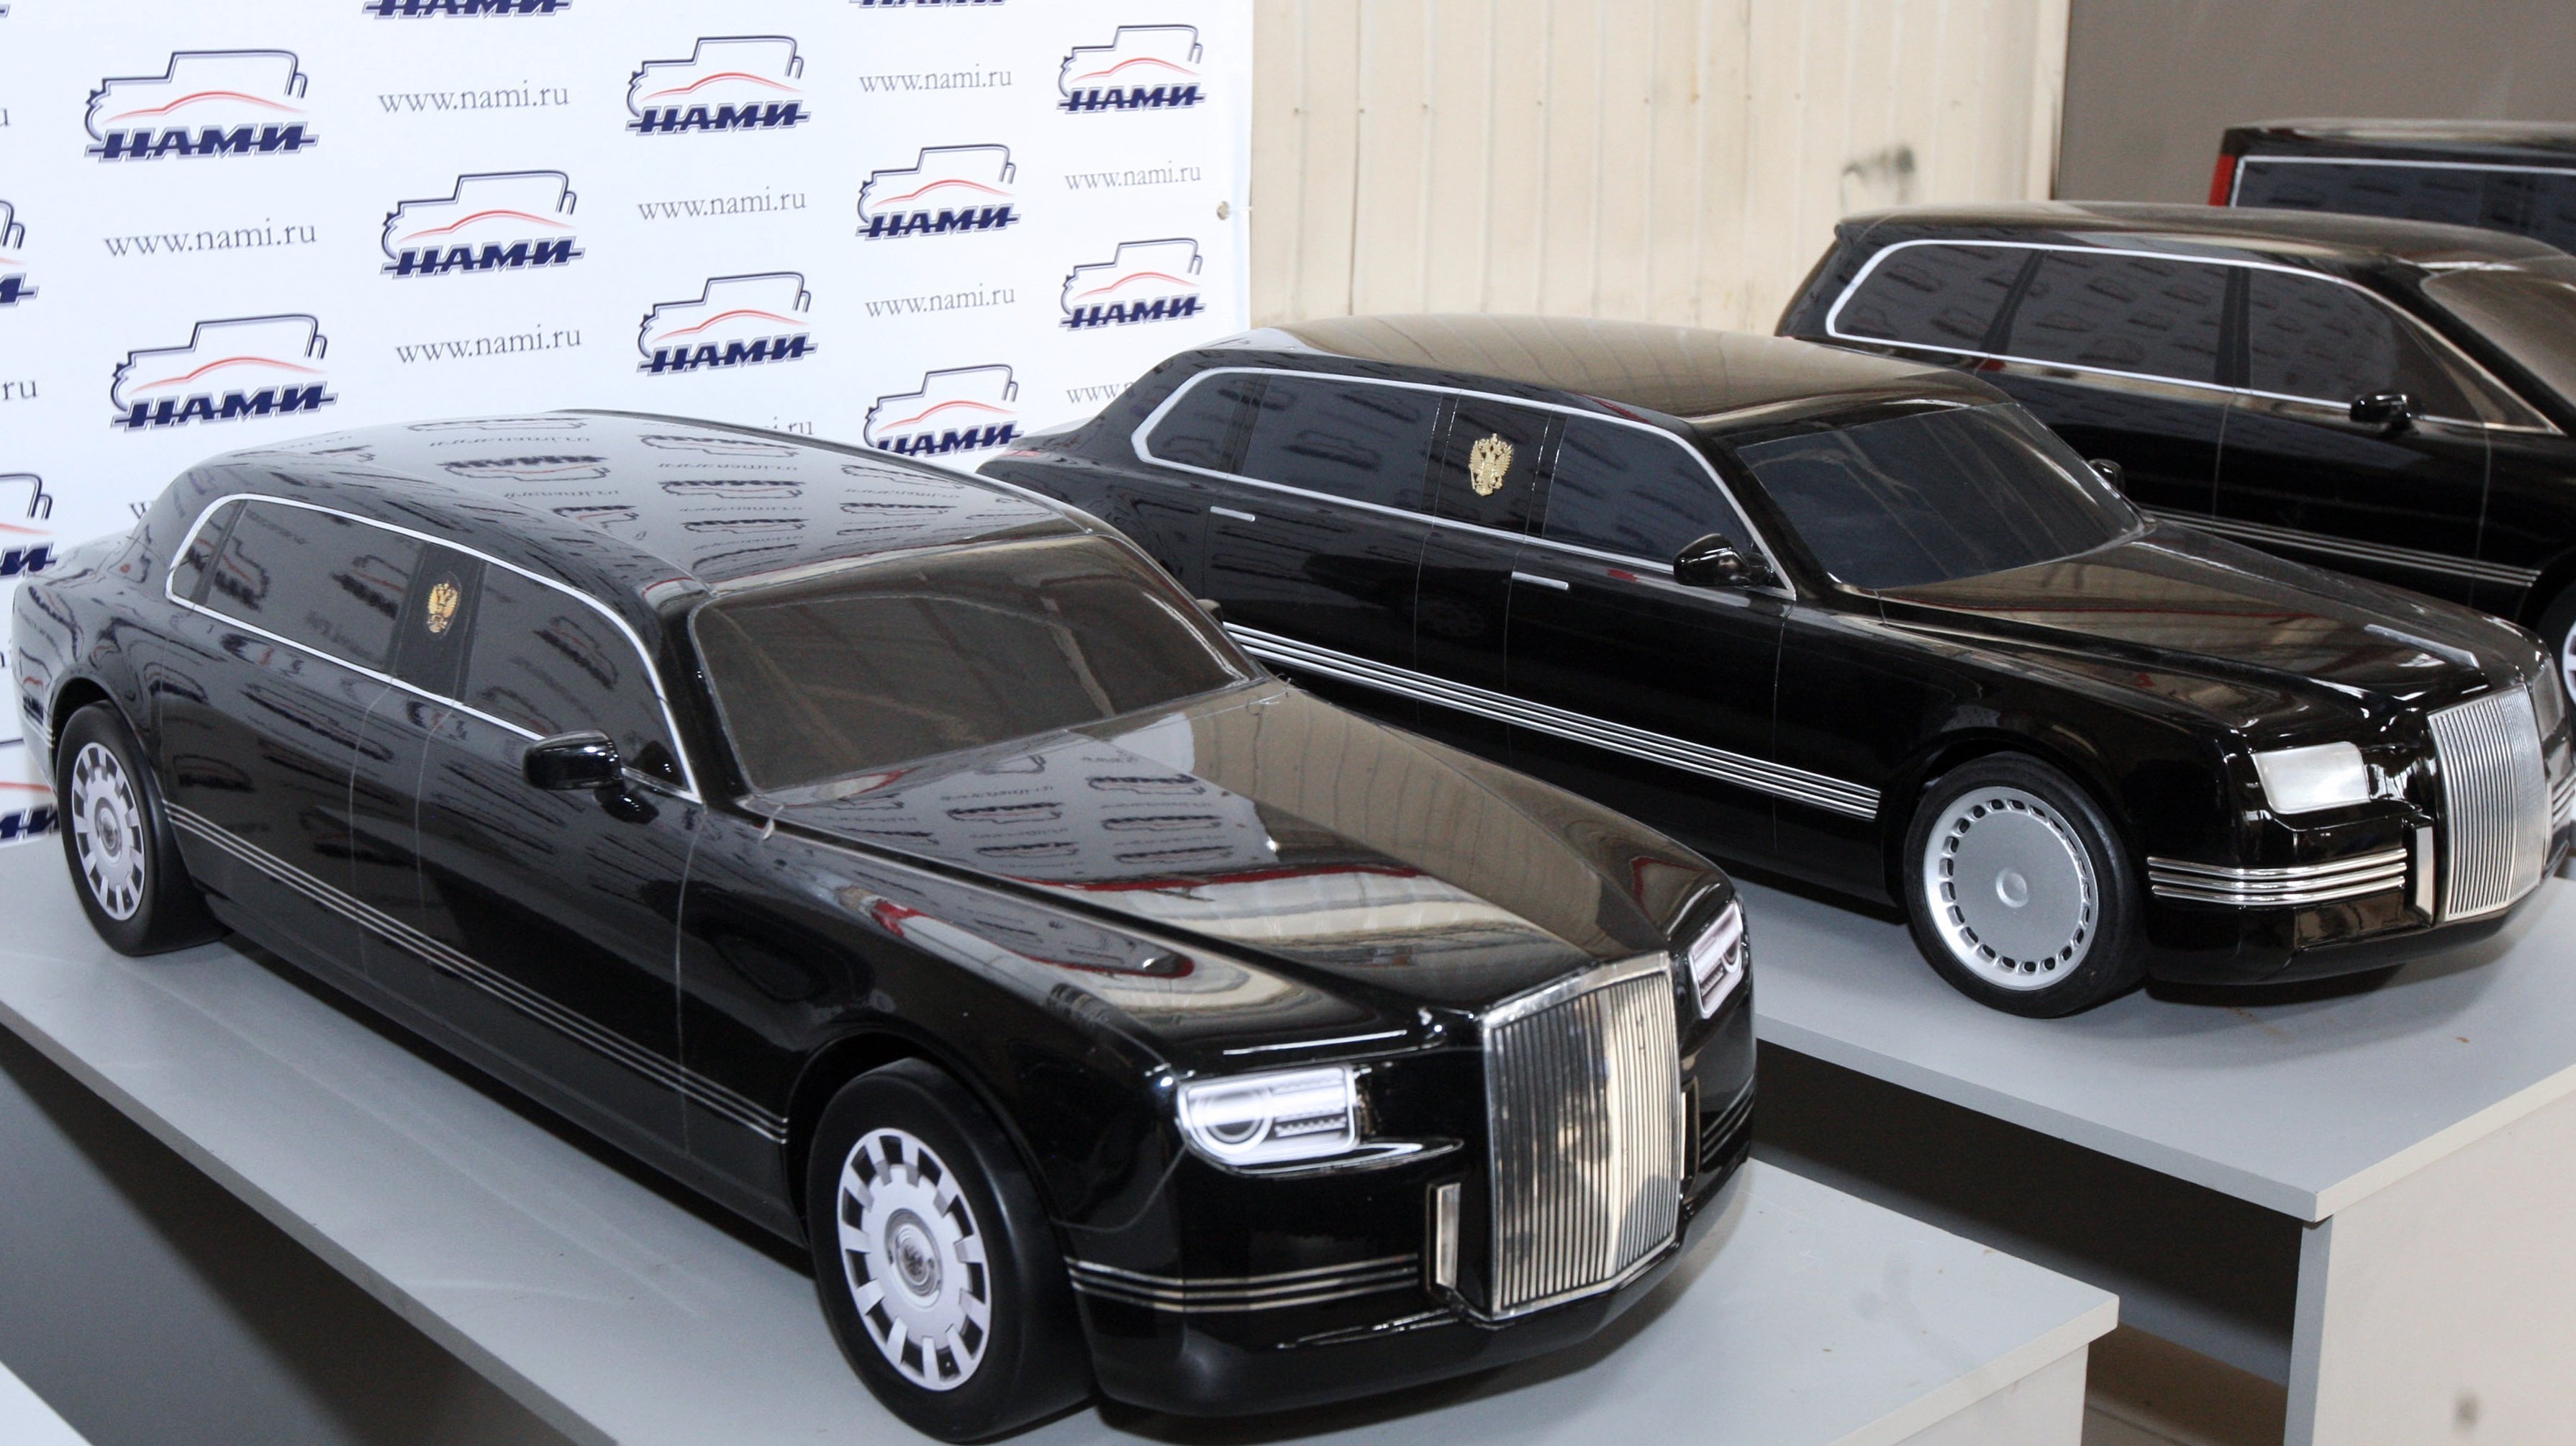 russian-president-putin-has-a-new-limo-doesn-t-look-like-a-chrysler-300-at-all-106244_1.jpg